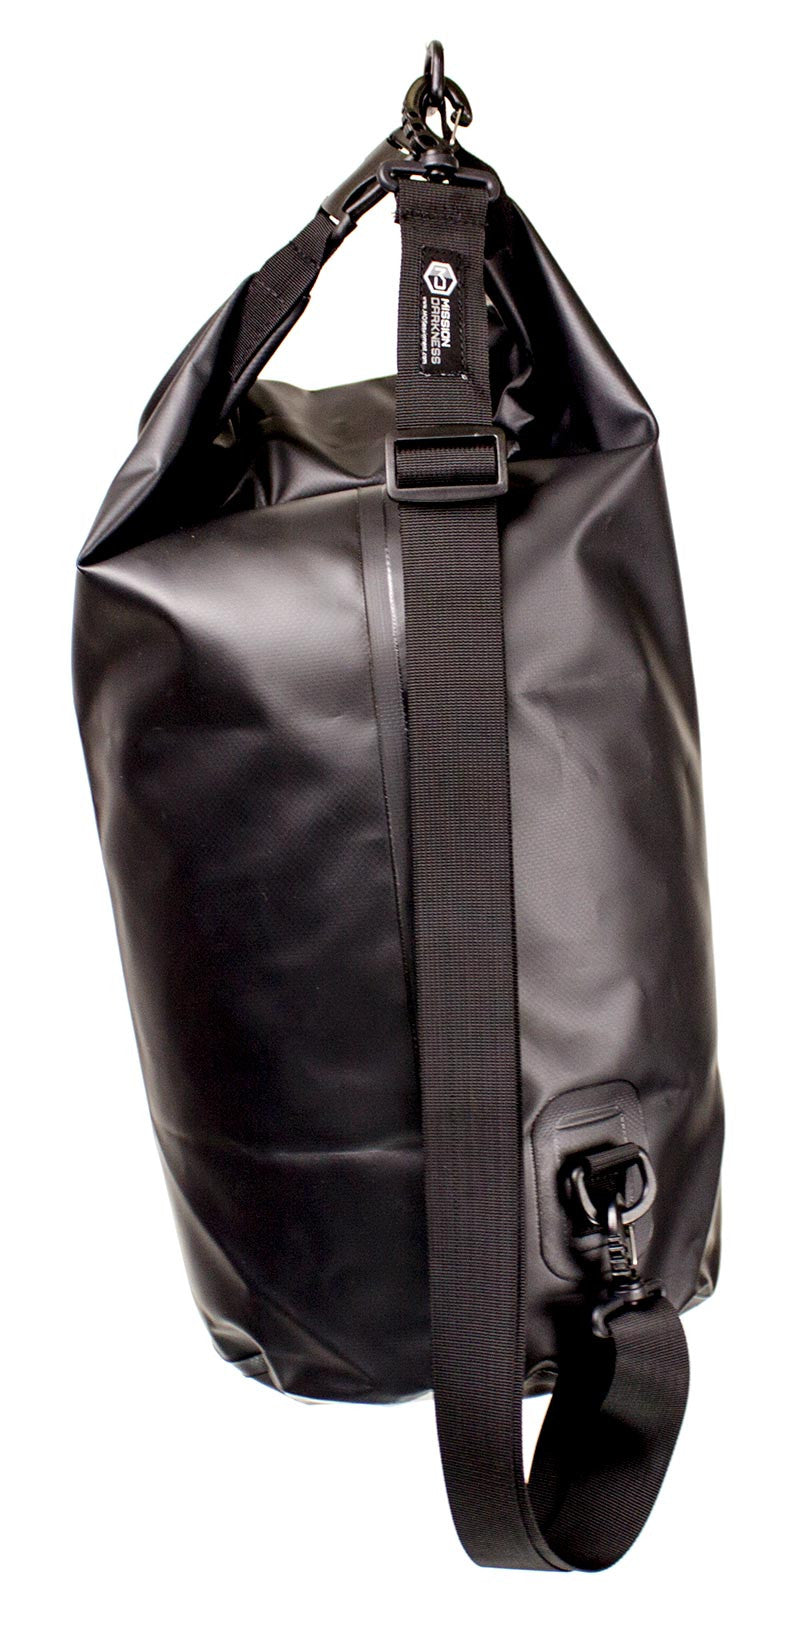 Mission Darkness Dry Shield Faraday Tote 15L. Waterproof Dry Bag for Electronic Device Security & Transport / Signal Blocking / Anti-Tracking / EMP